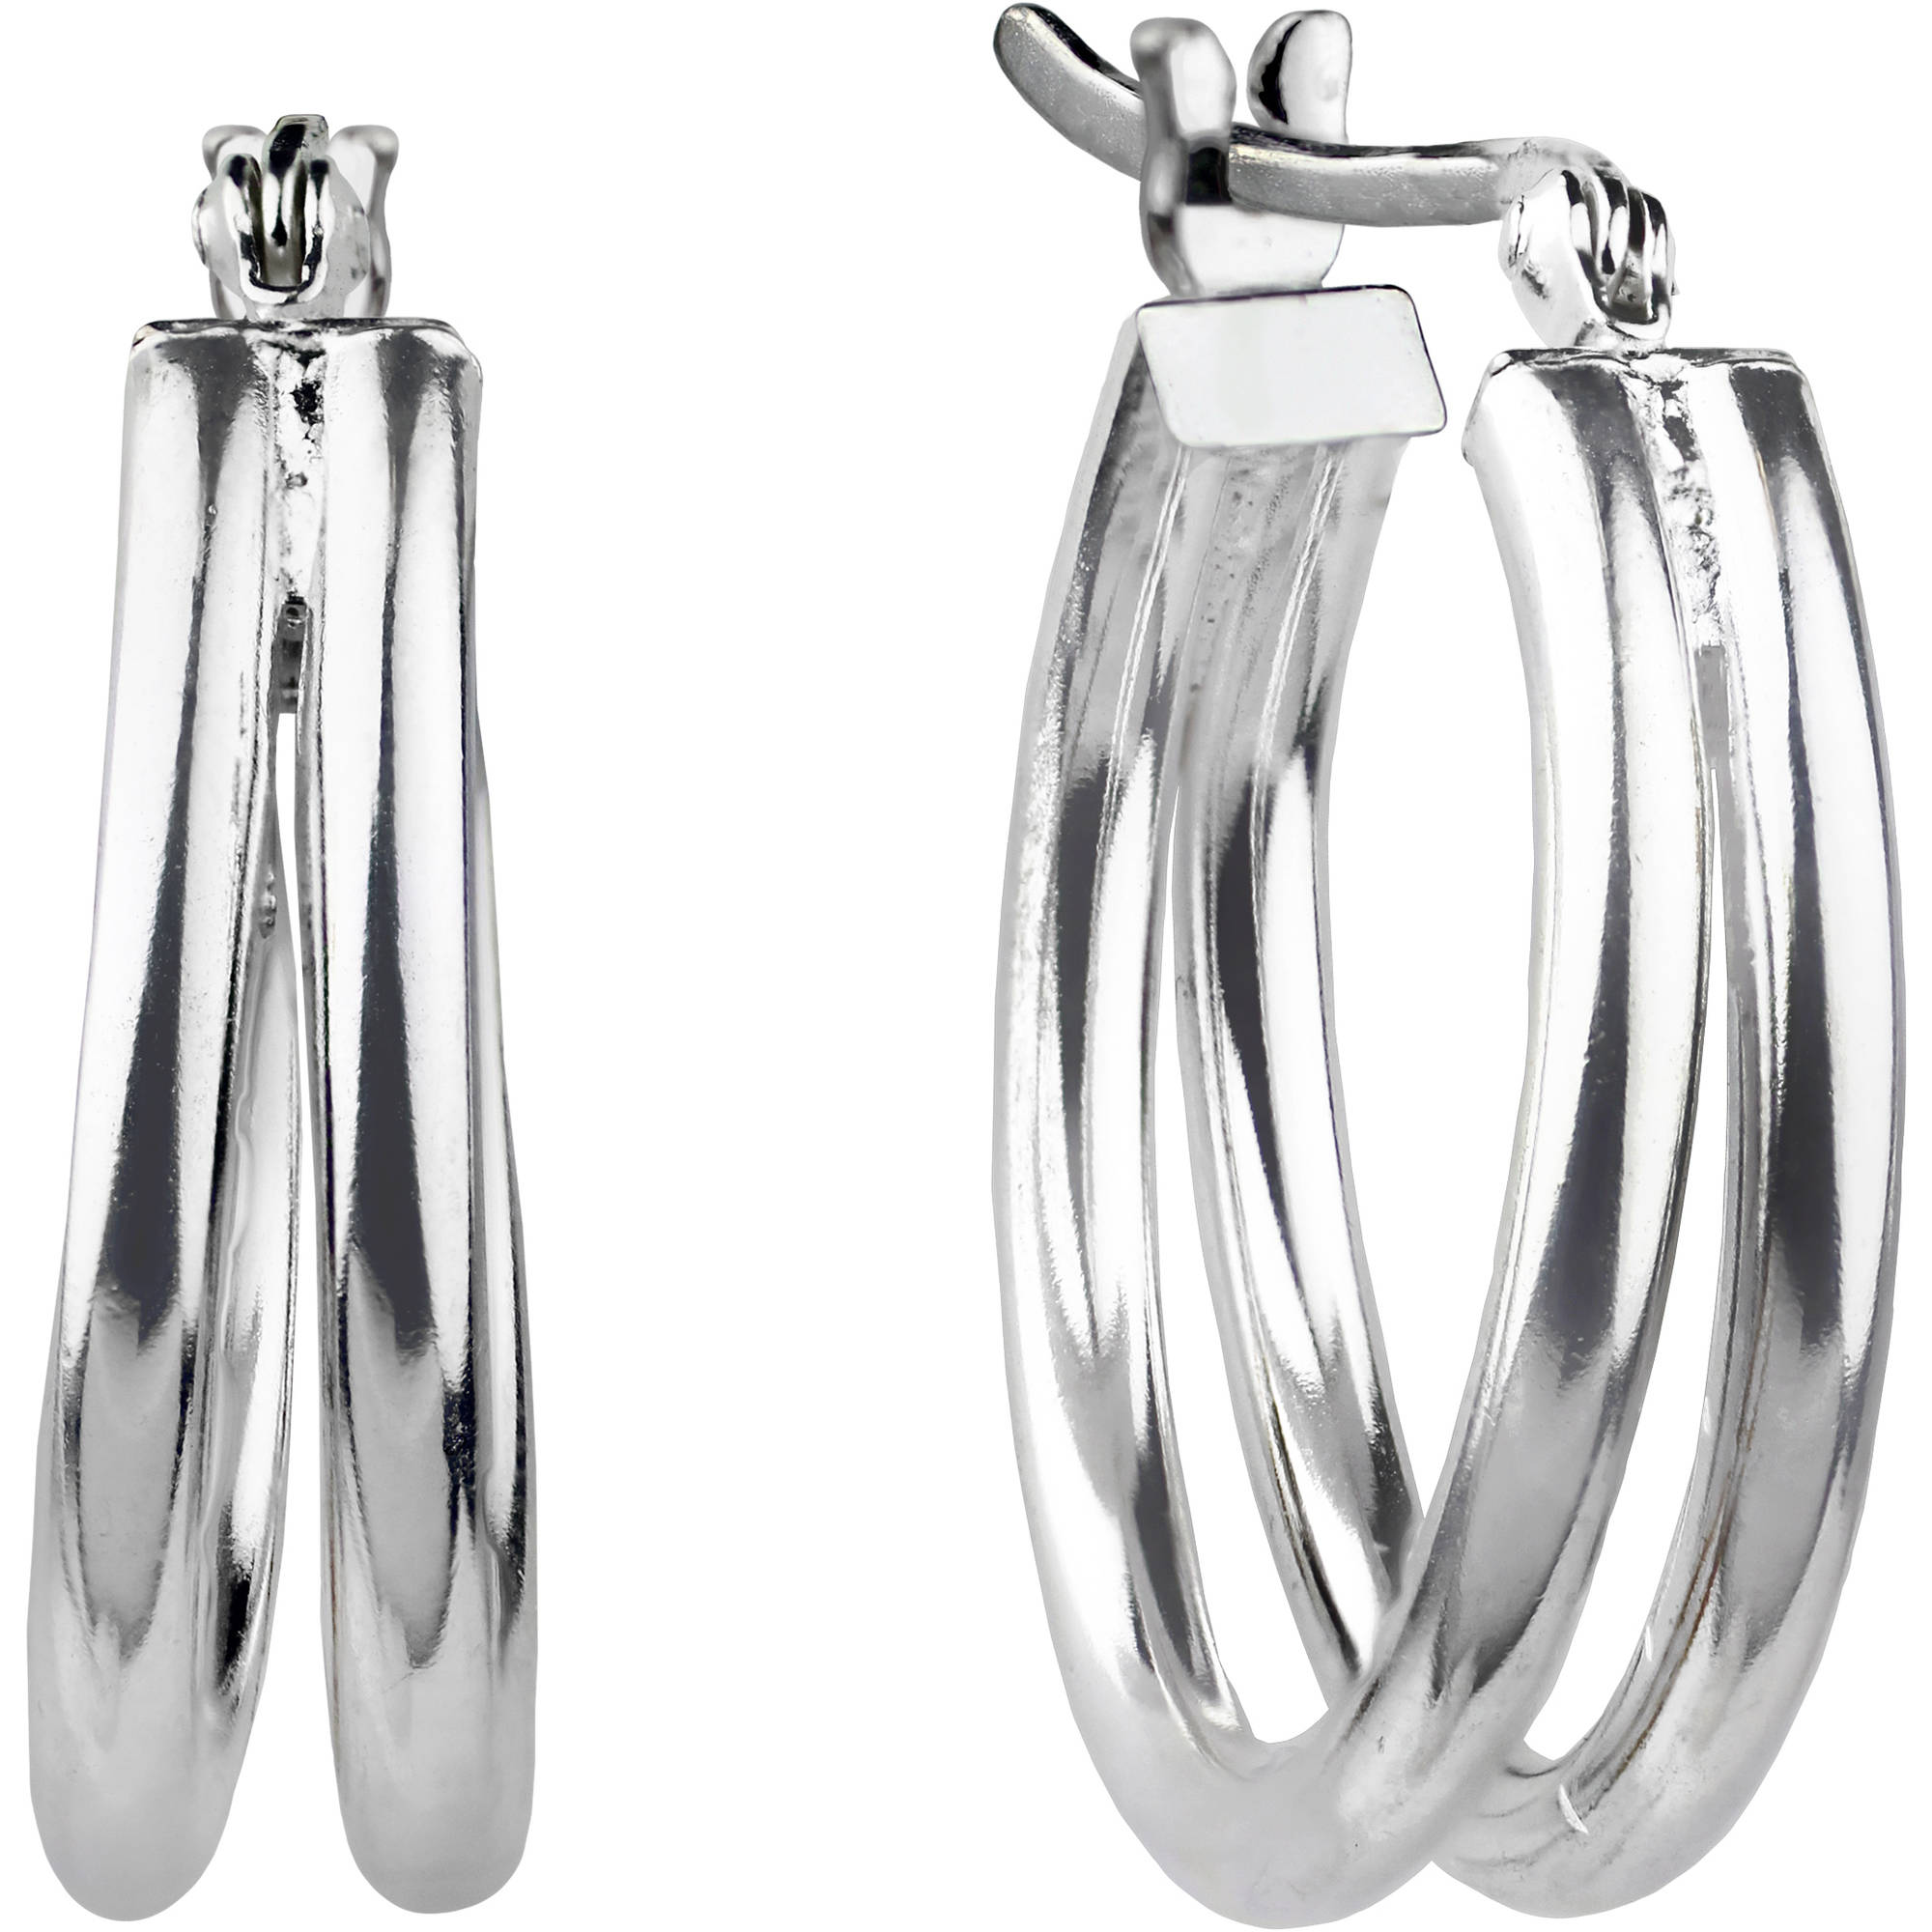 Brilliance Fine Jewelry Sterling Silver Round Click Top Hoop Earrings - image 1 of 2